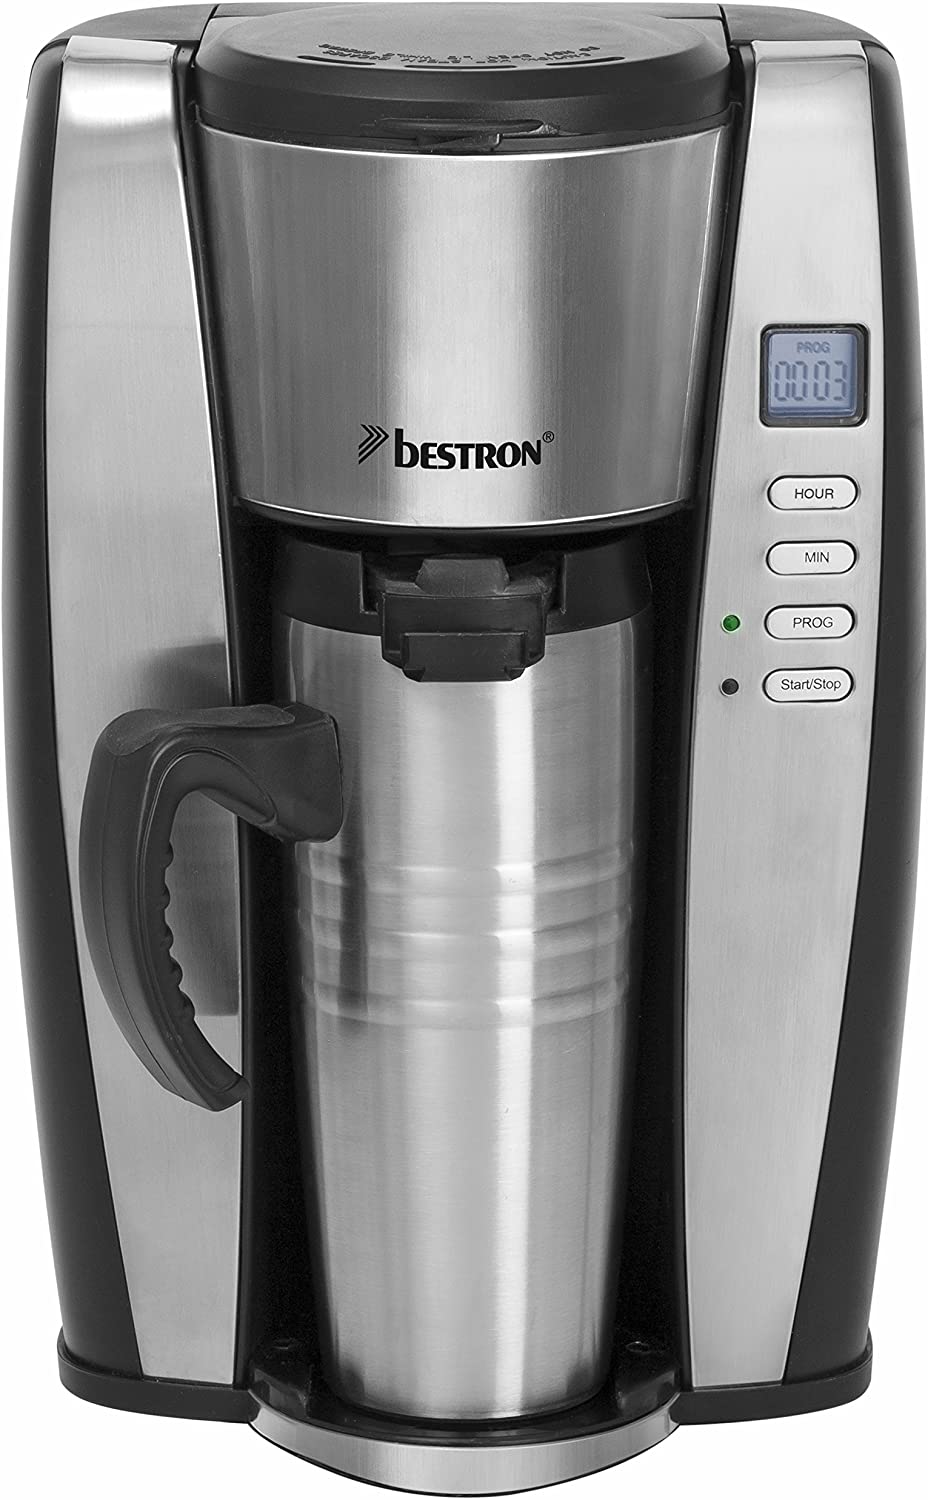 Bestron ACUP650 Coffee Machine with Flask, 650 W, Black/Stainless Steel